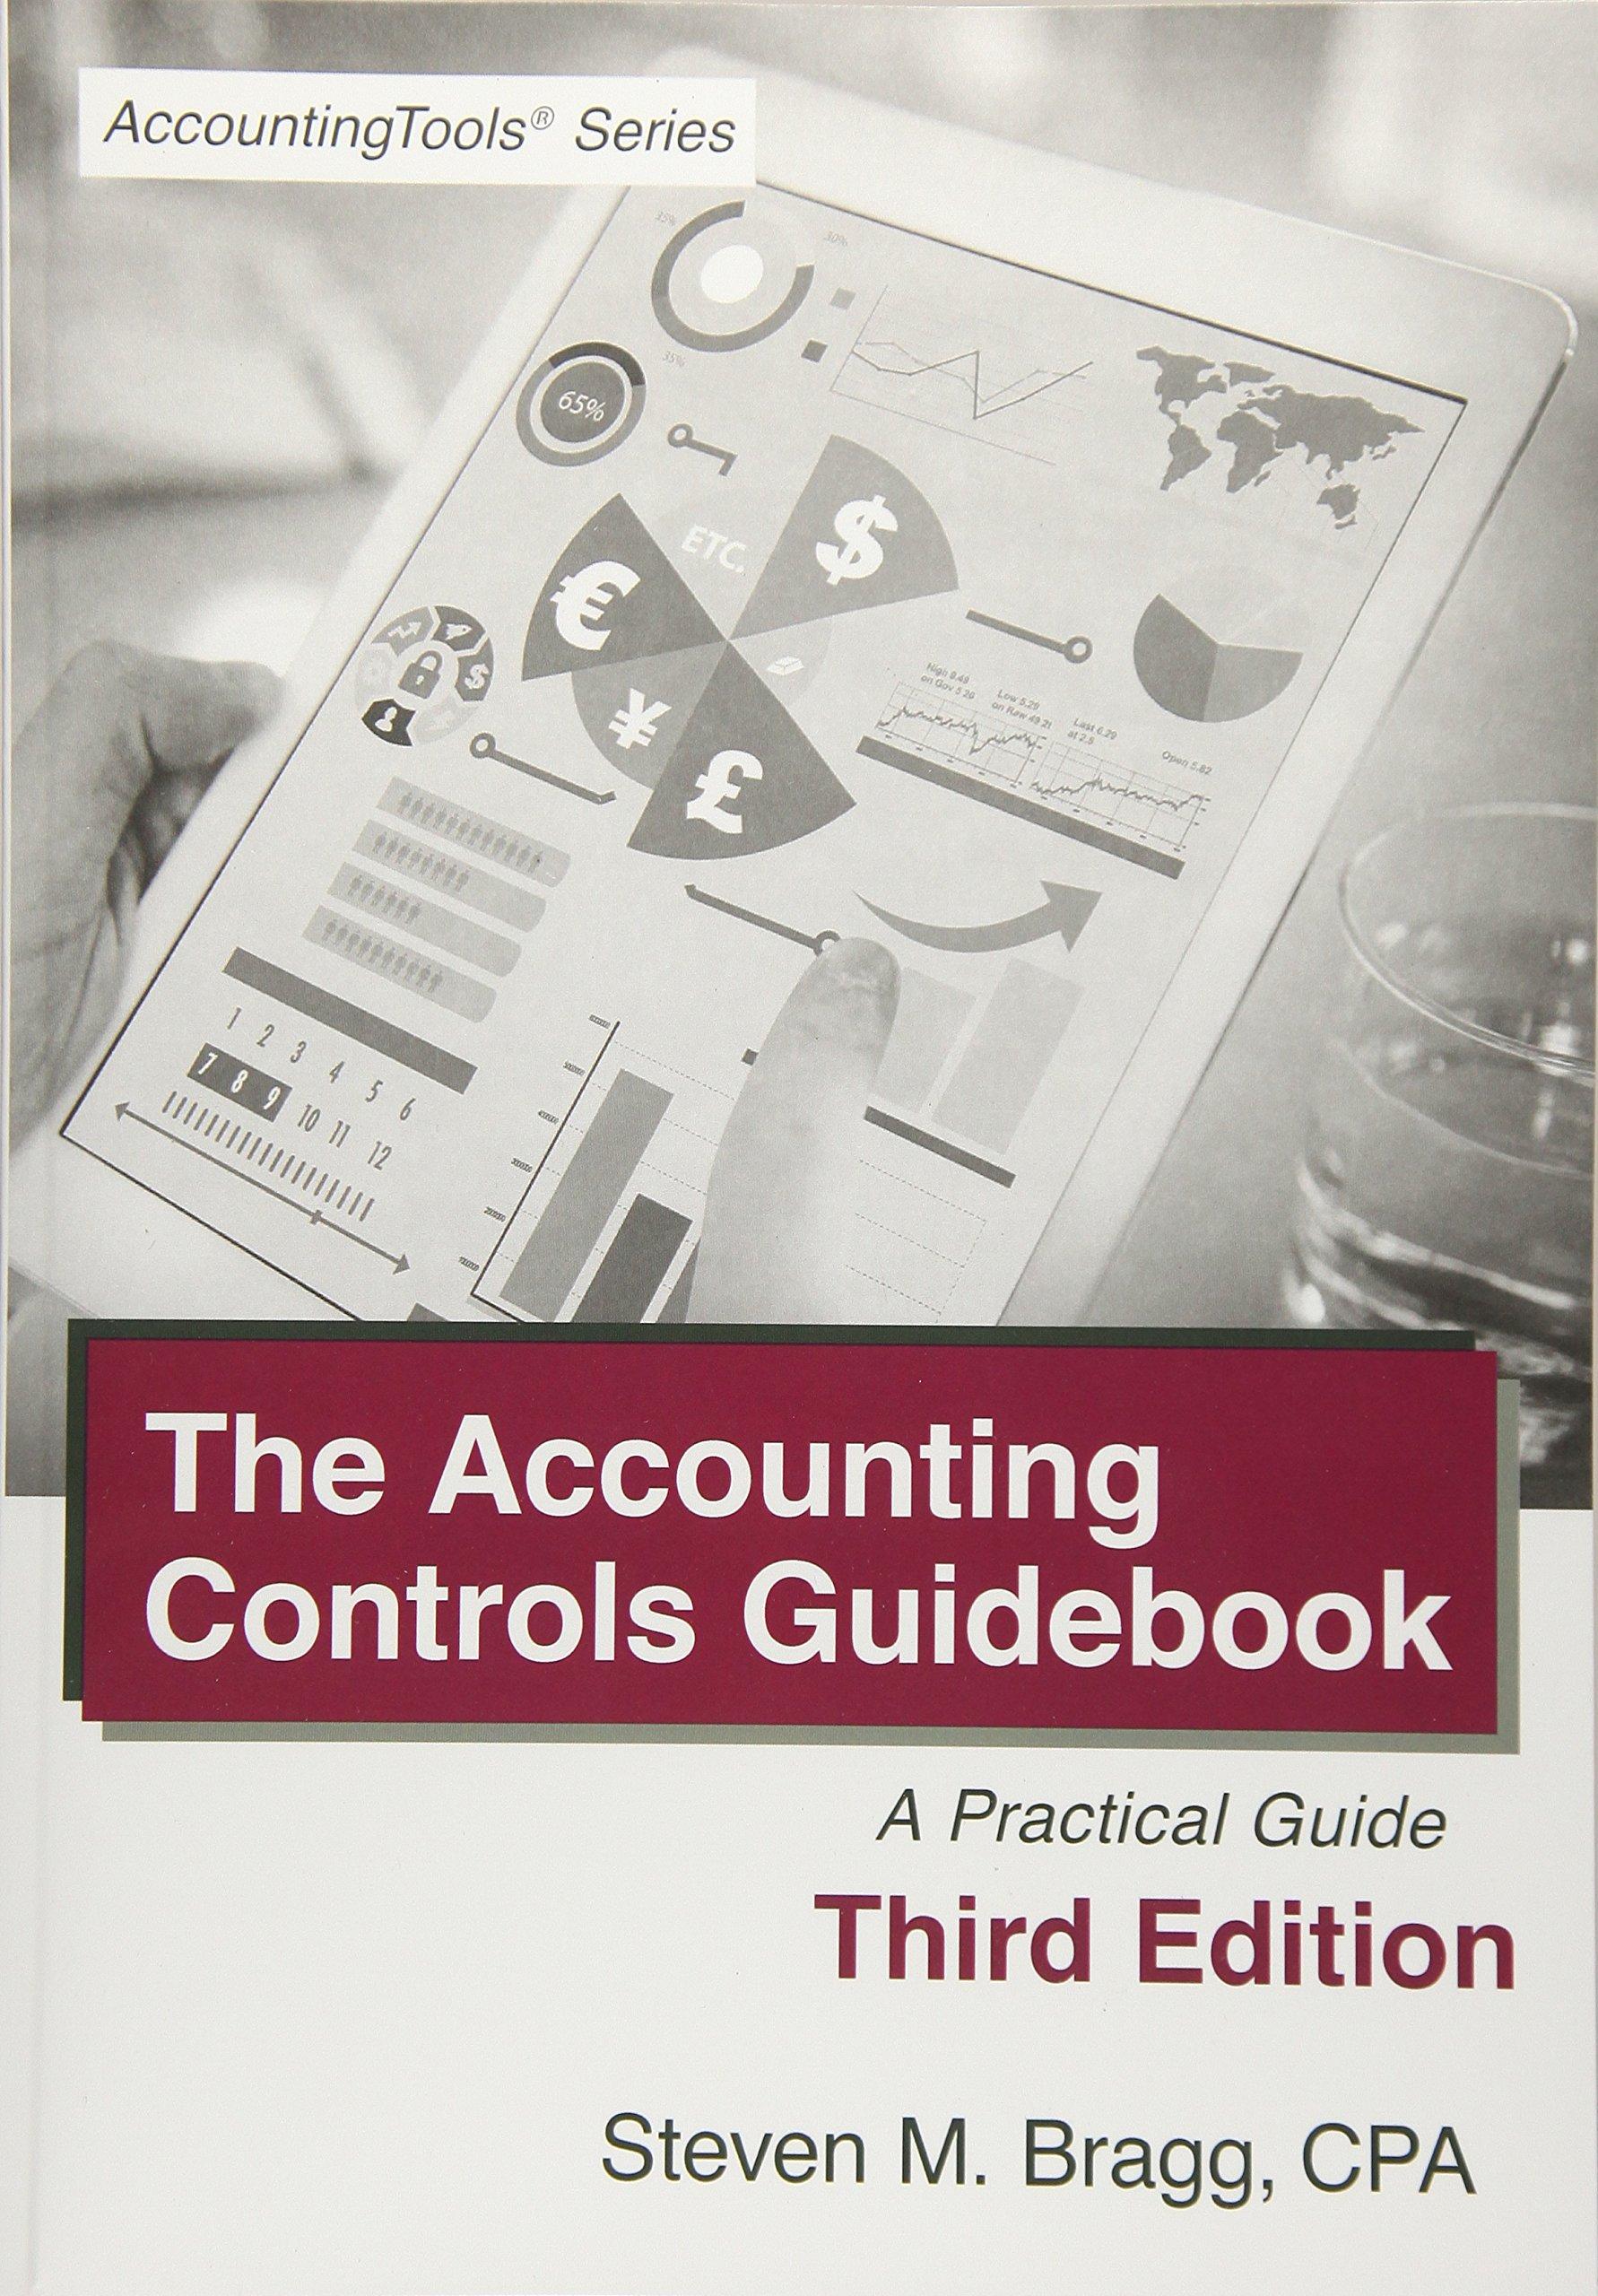 the accounting controls guidebook a practical guide 3rd edition steven m. bragg 1938910575, 978-1938910579